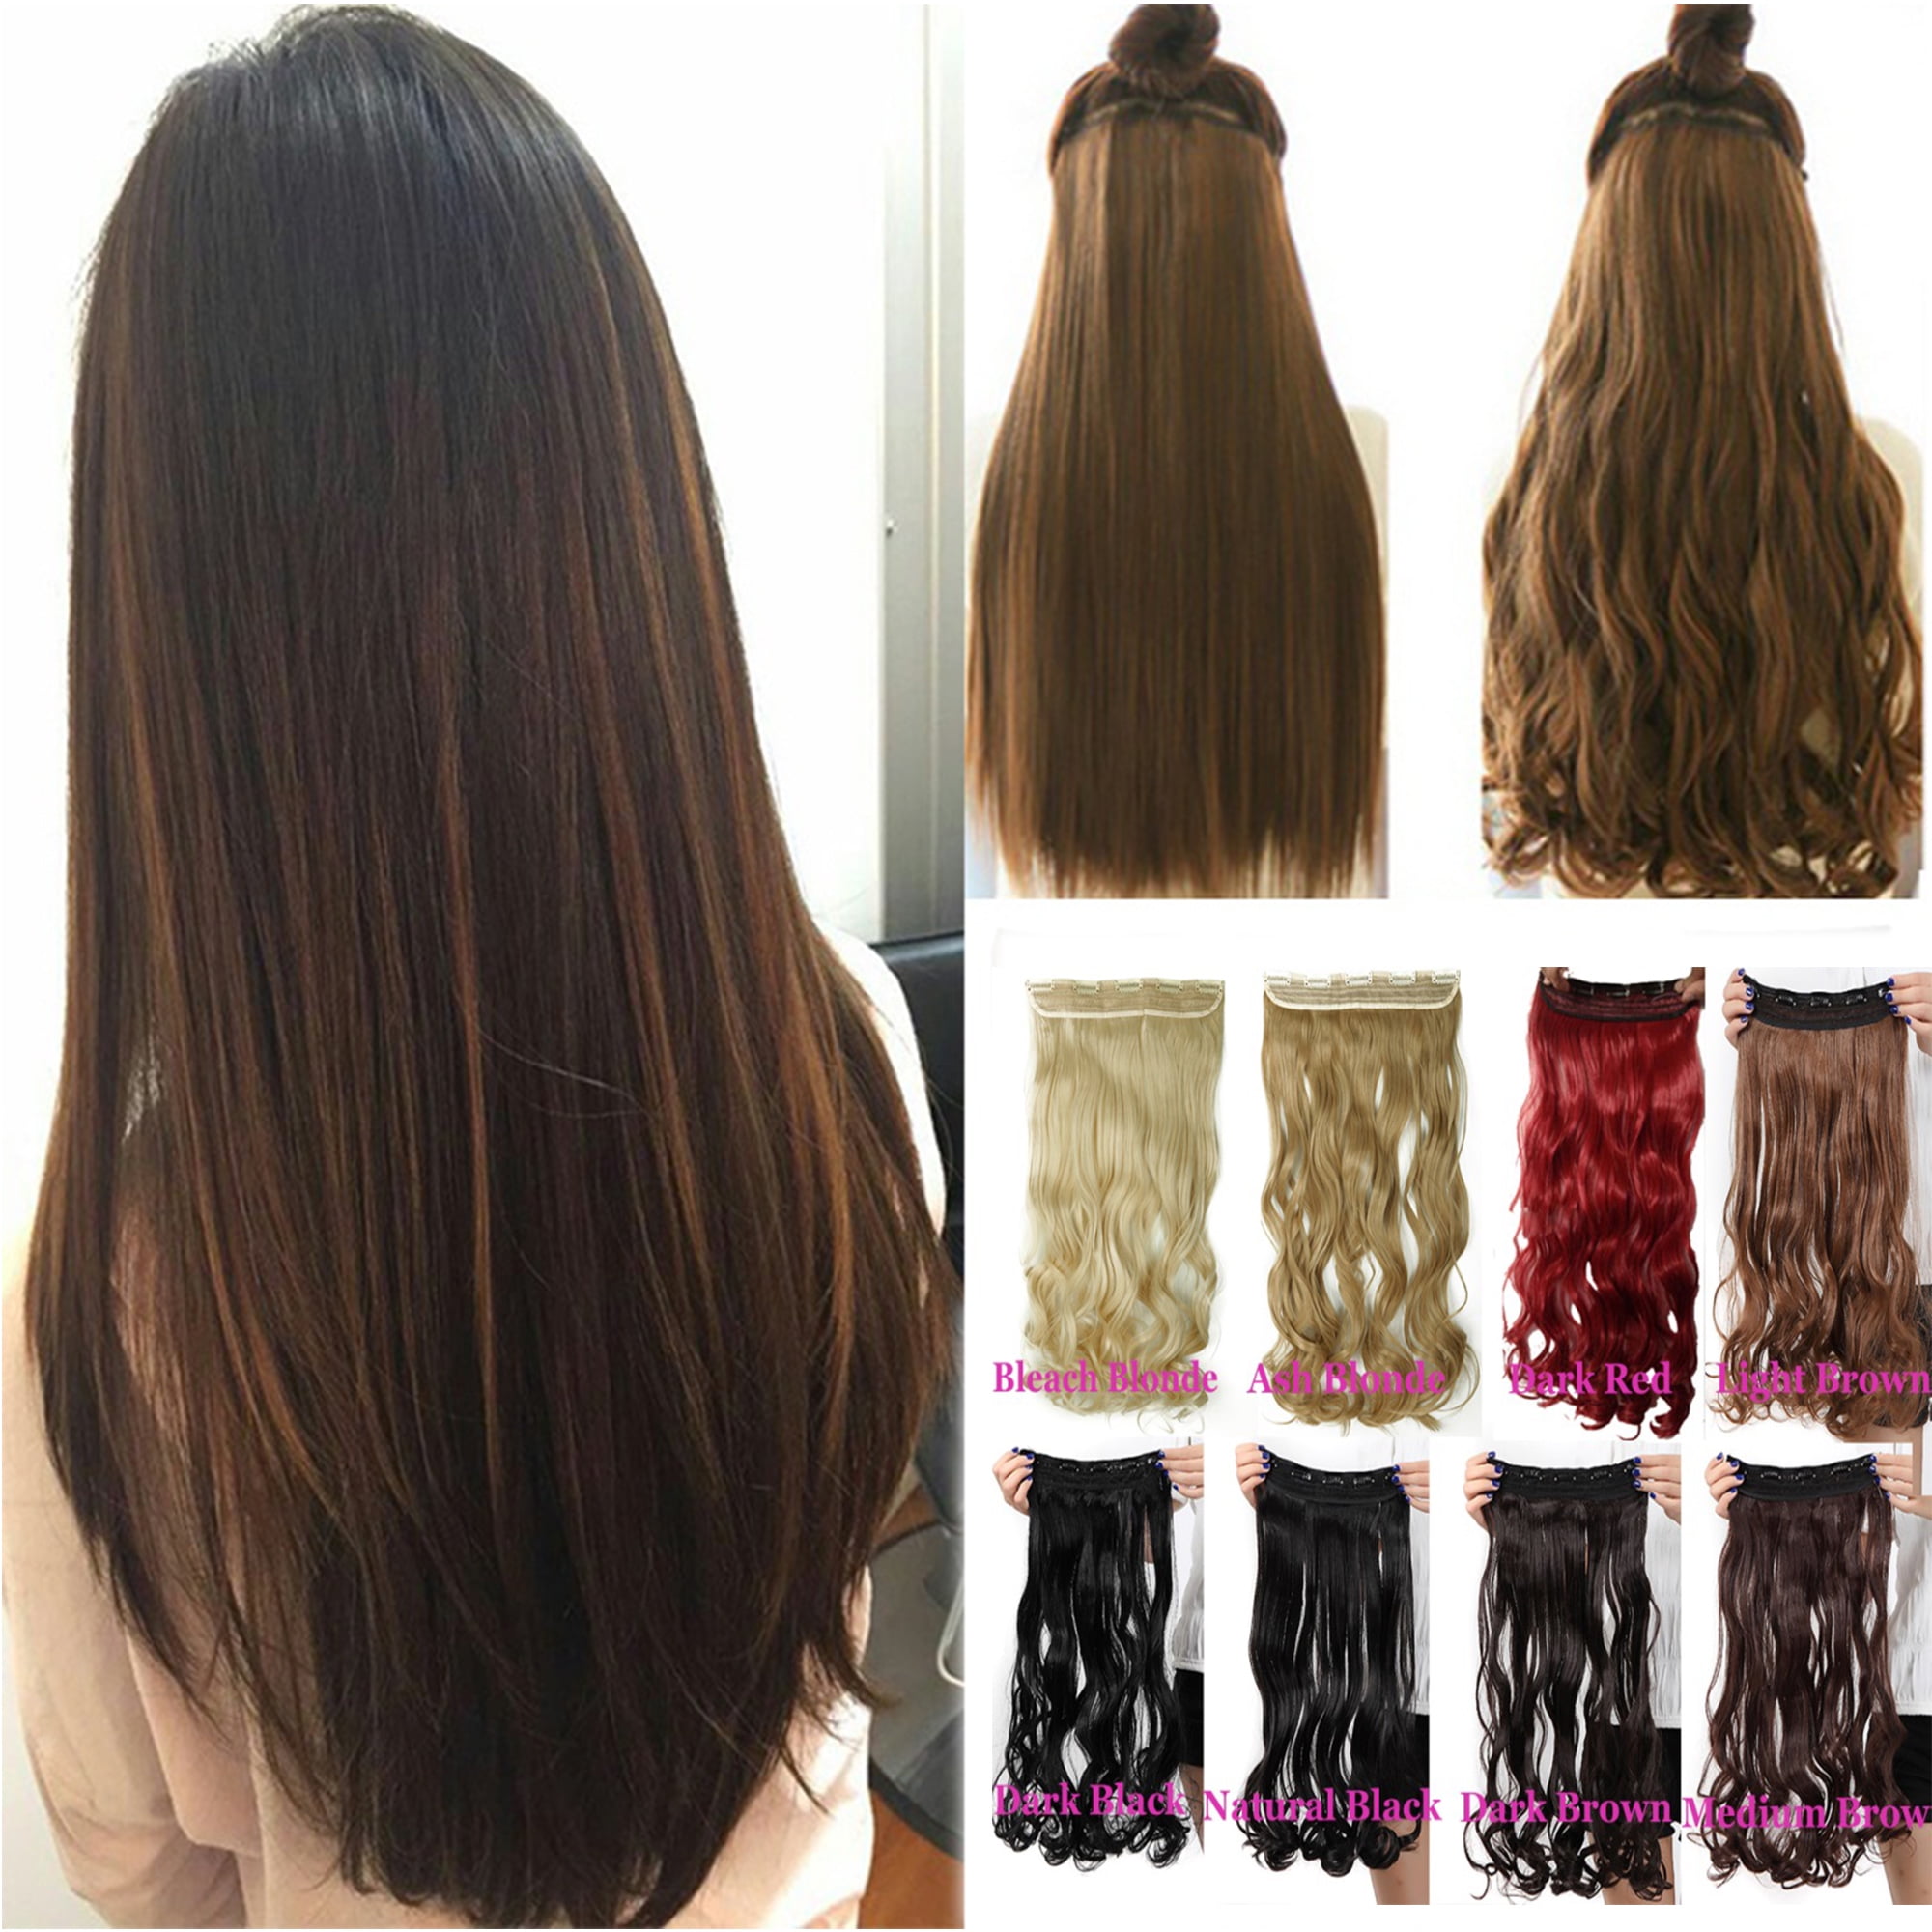 Florata 24 29 Inches Wavy 3 4 Full Head Clip In Hair Extensions One Piece Hair Up To 20 Colors Walmart Com Walmart Com - hot curly free hair roblox